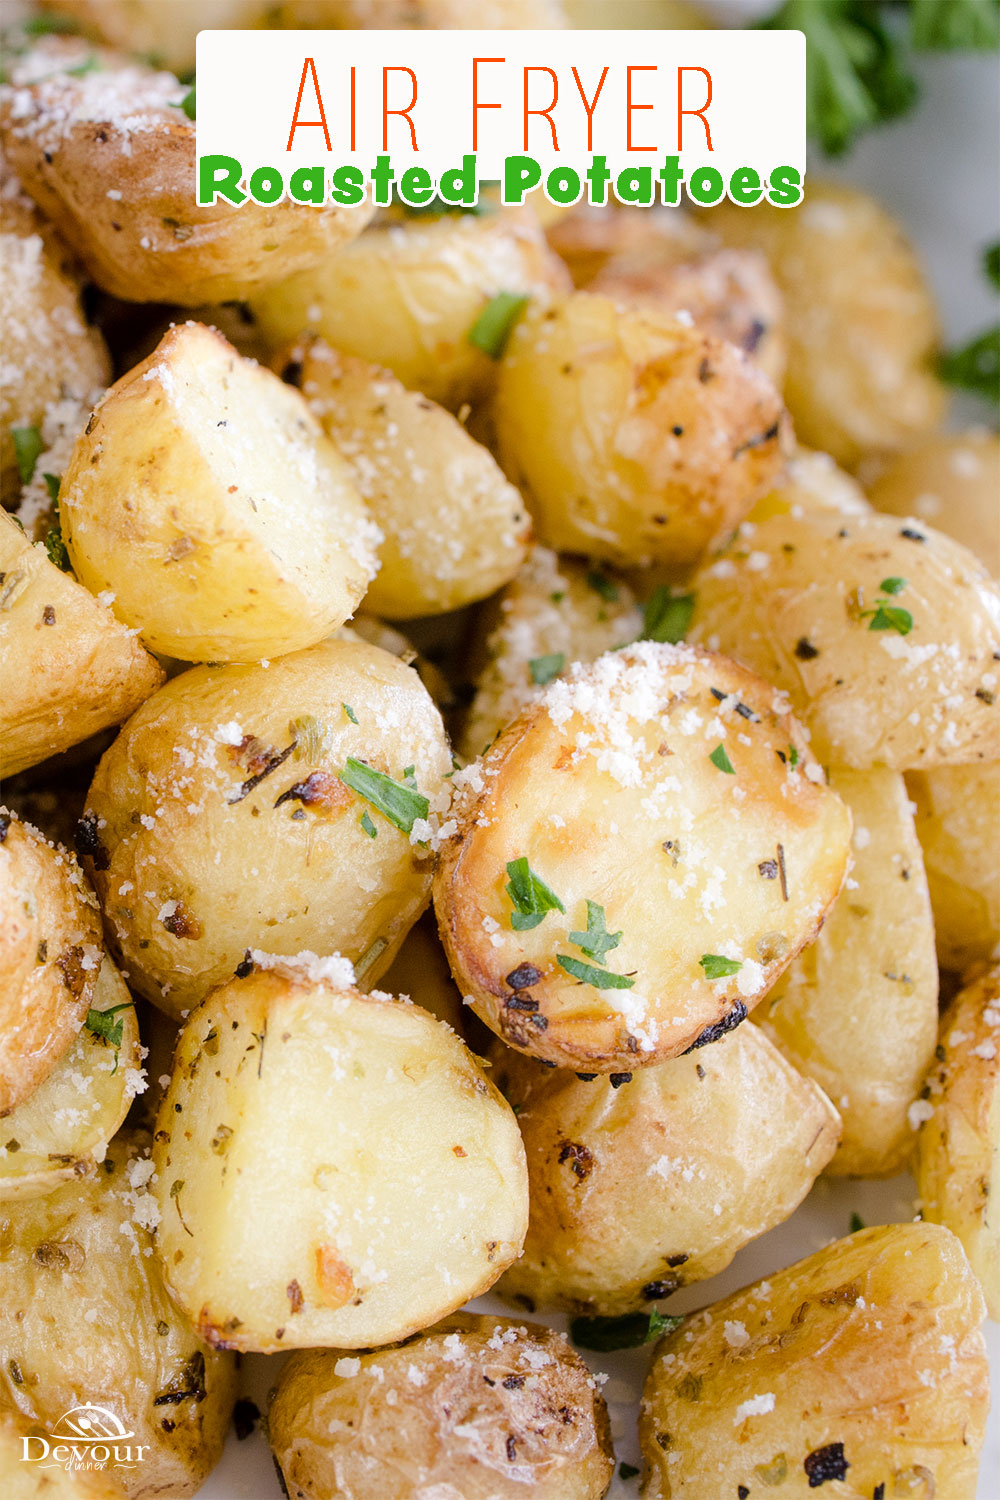 Crispy, delicious, and perfectly seasoned, these Air Fryer Roasted Potatoes are a quick and easy side dish recipe that will go well with almost any meal!